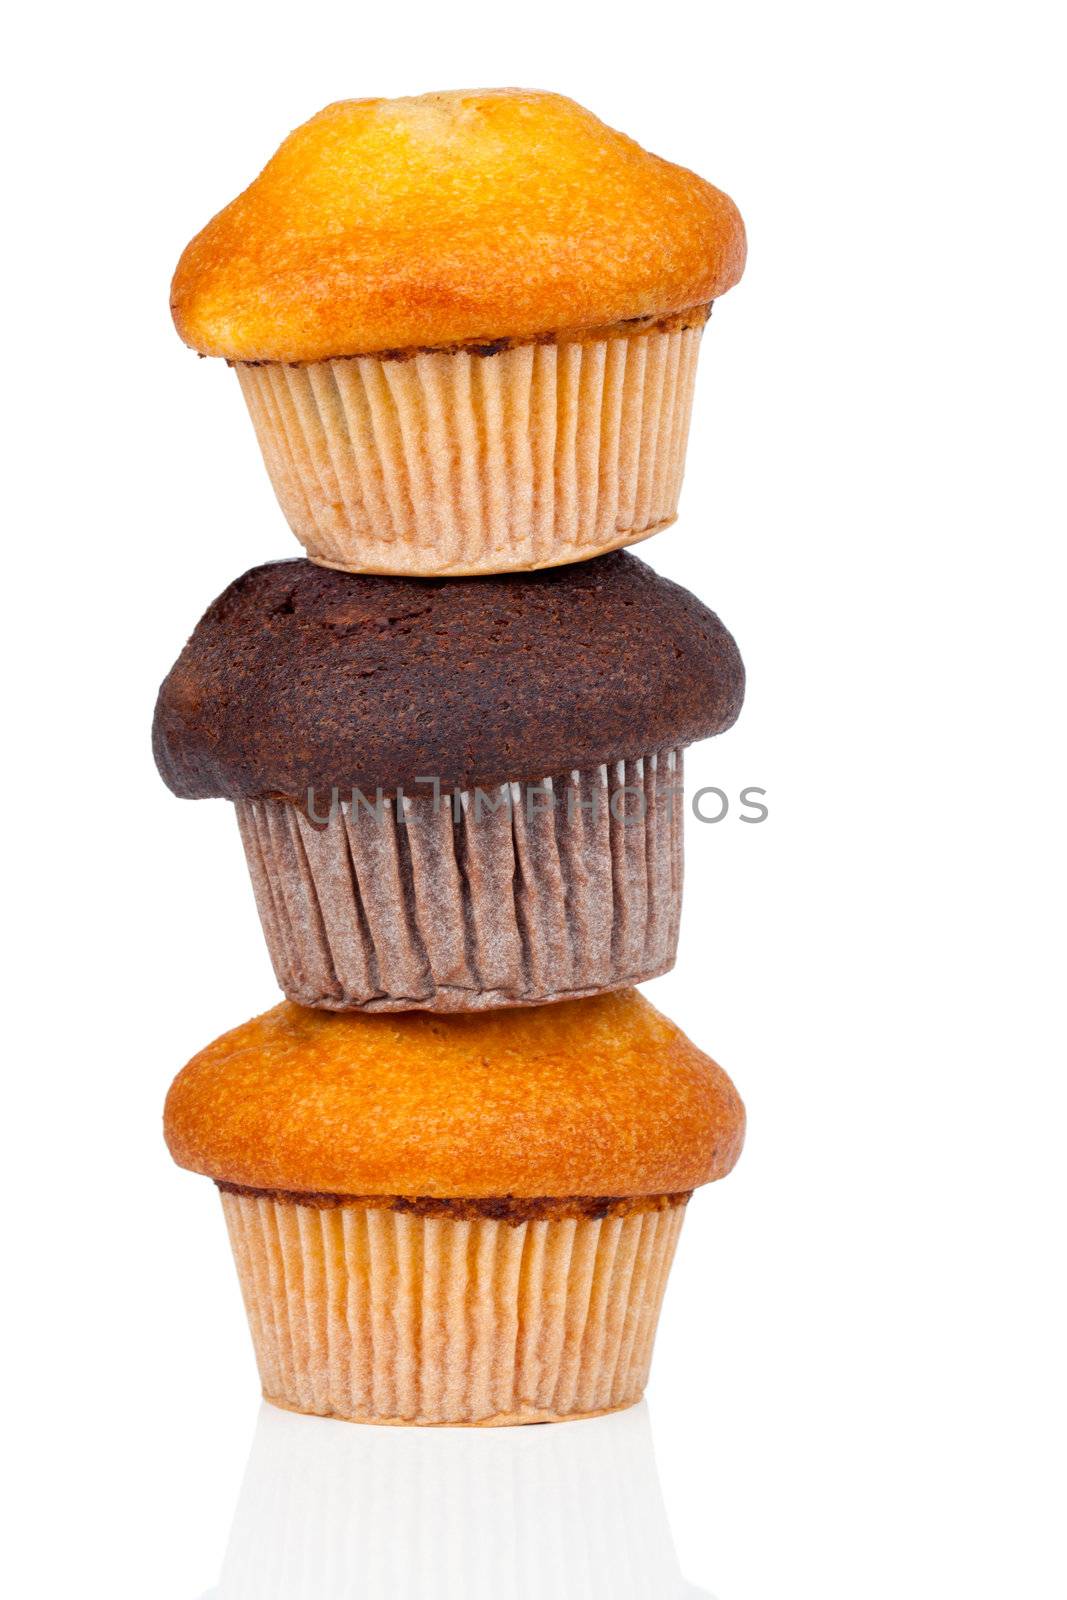 muffin isolated on white background.